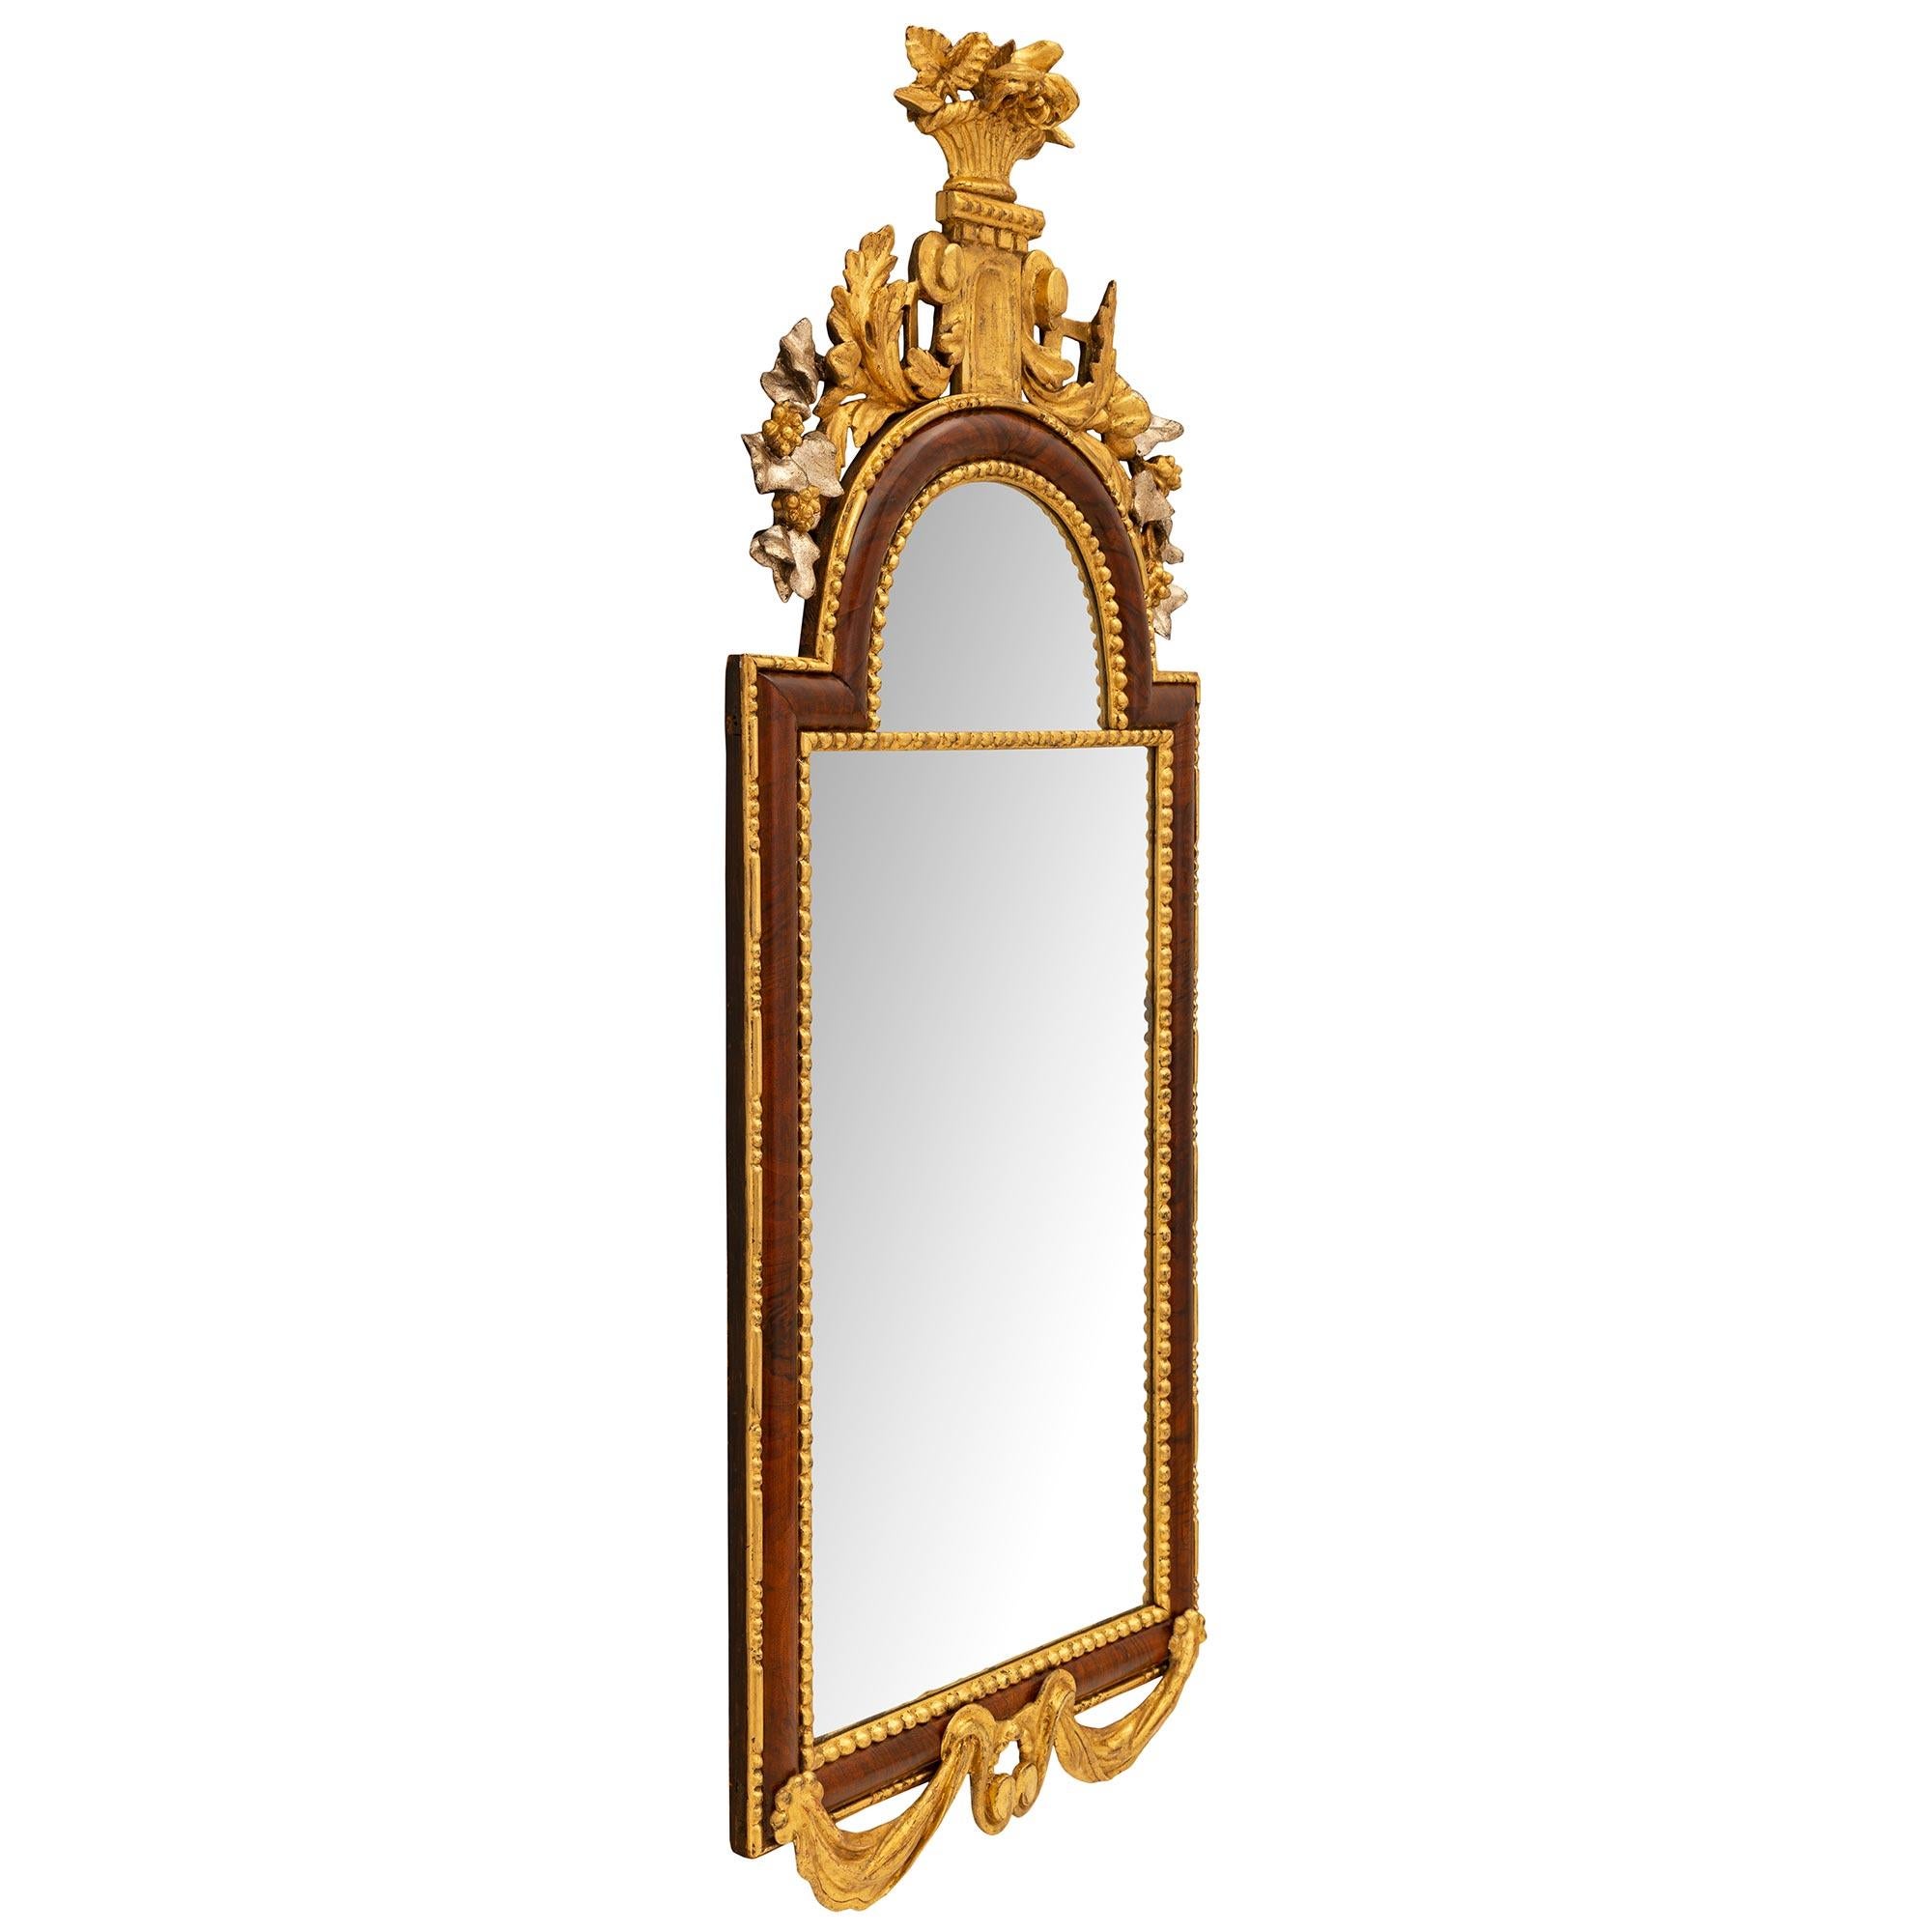 An exceptional and very unique German 18th century neo-classical period burl Walnut, giltwood, and Mecca mirror. The mirror retains its original mirror plates each framed within a most decorative beaded wrap around giltwood band. The frame showcases